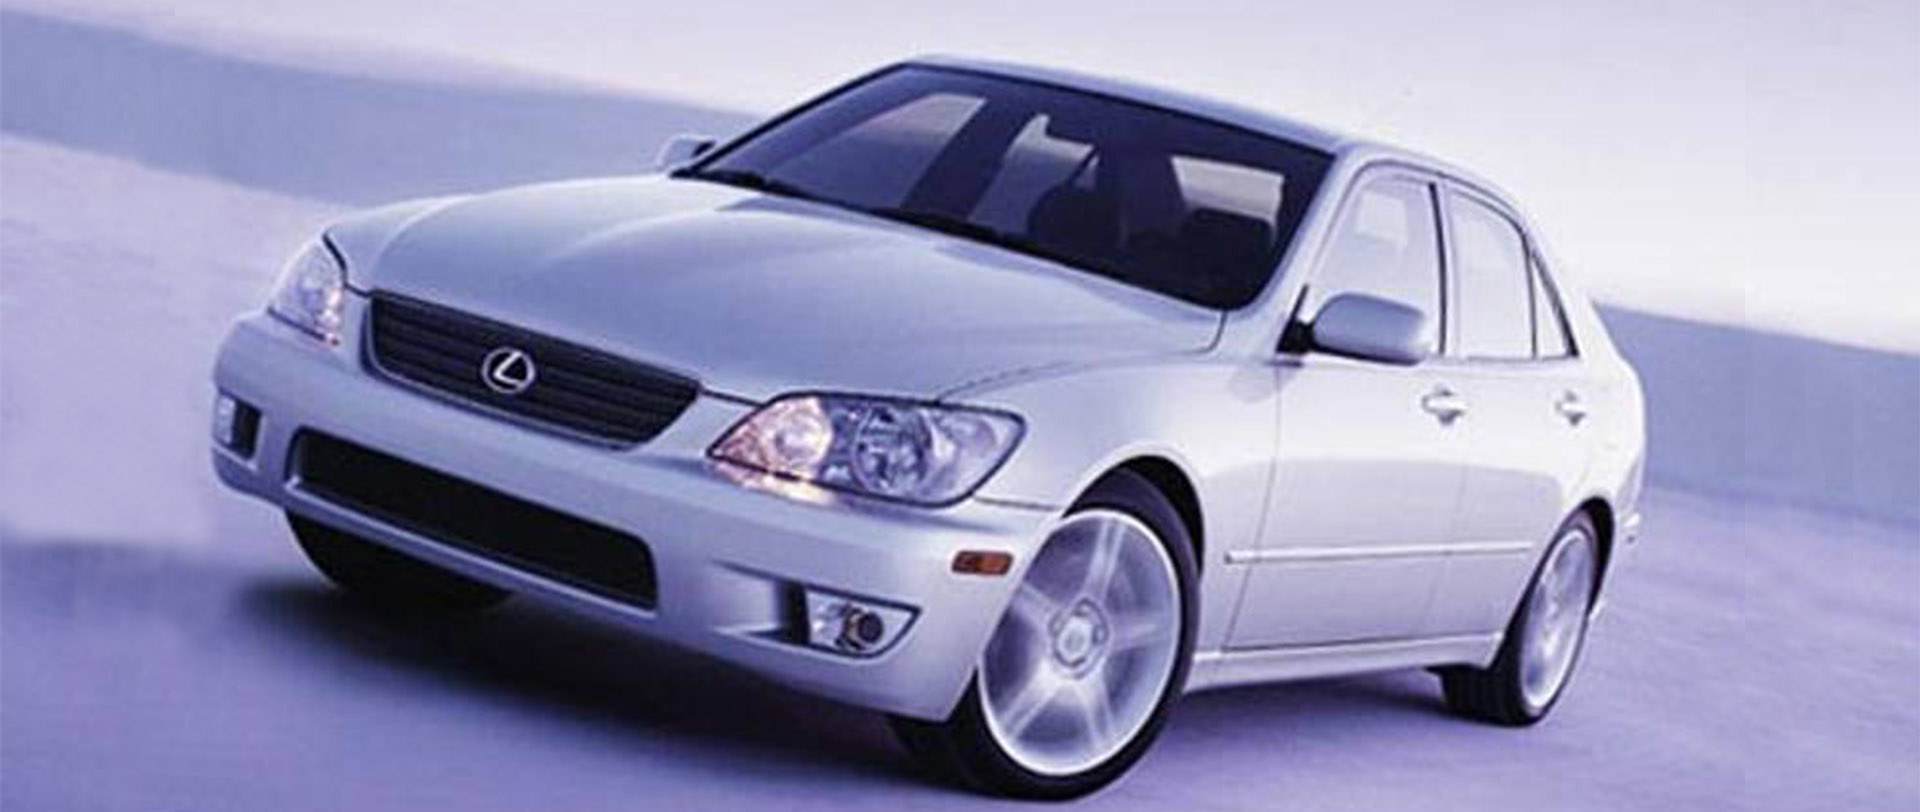 THE FIRST LEXUS IS